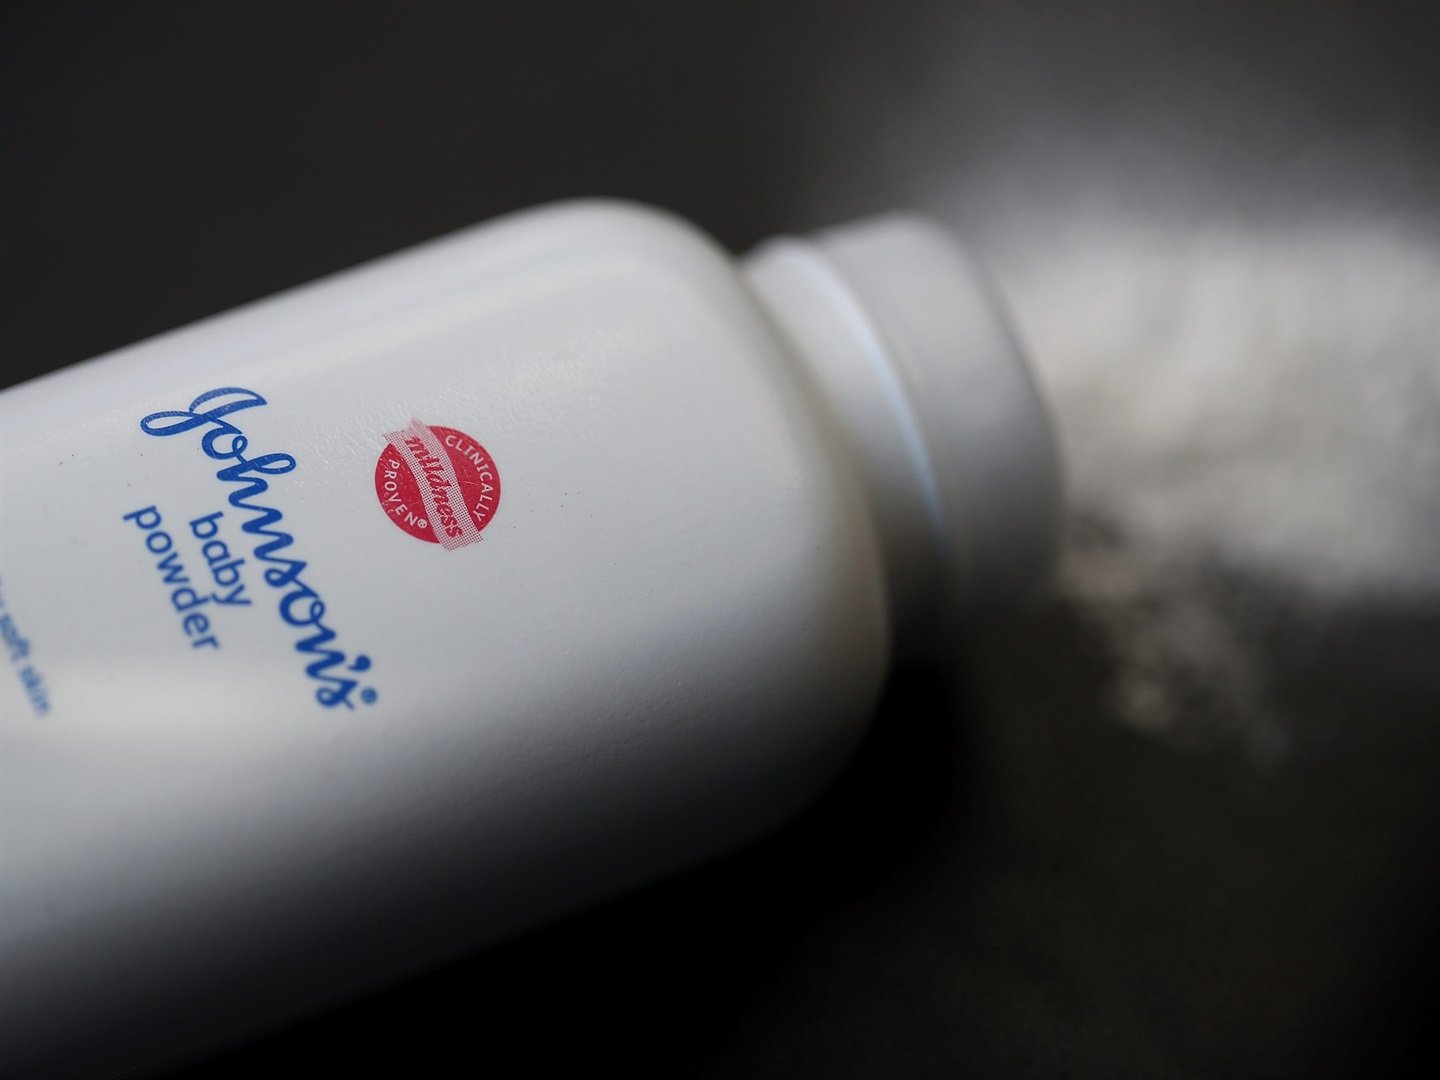 J&J owes at least $ 2 billion to people who say they got sick from asbestos-contaminated baby dust.